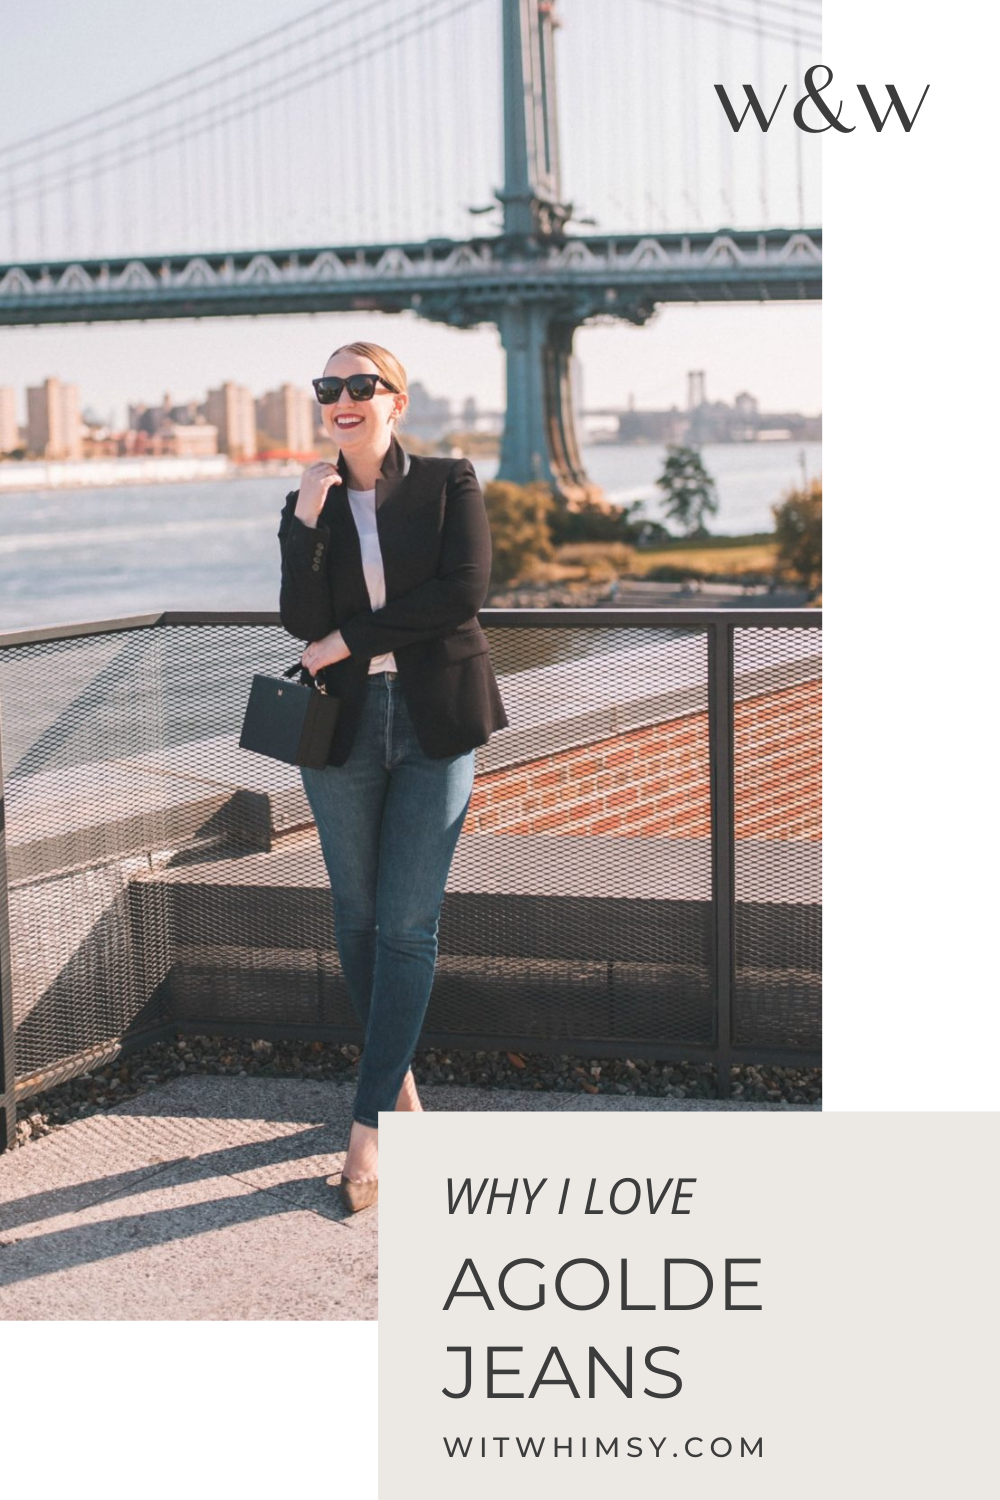 Why I Love Agolde Jeans | wit & whimsy